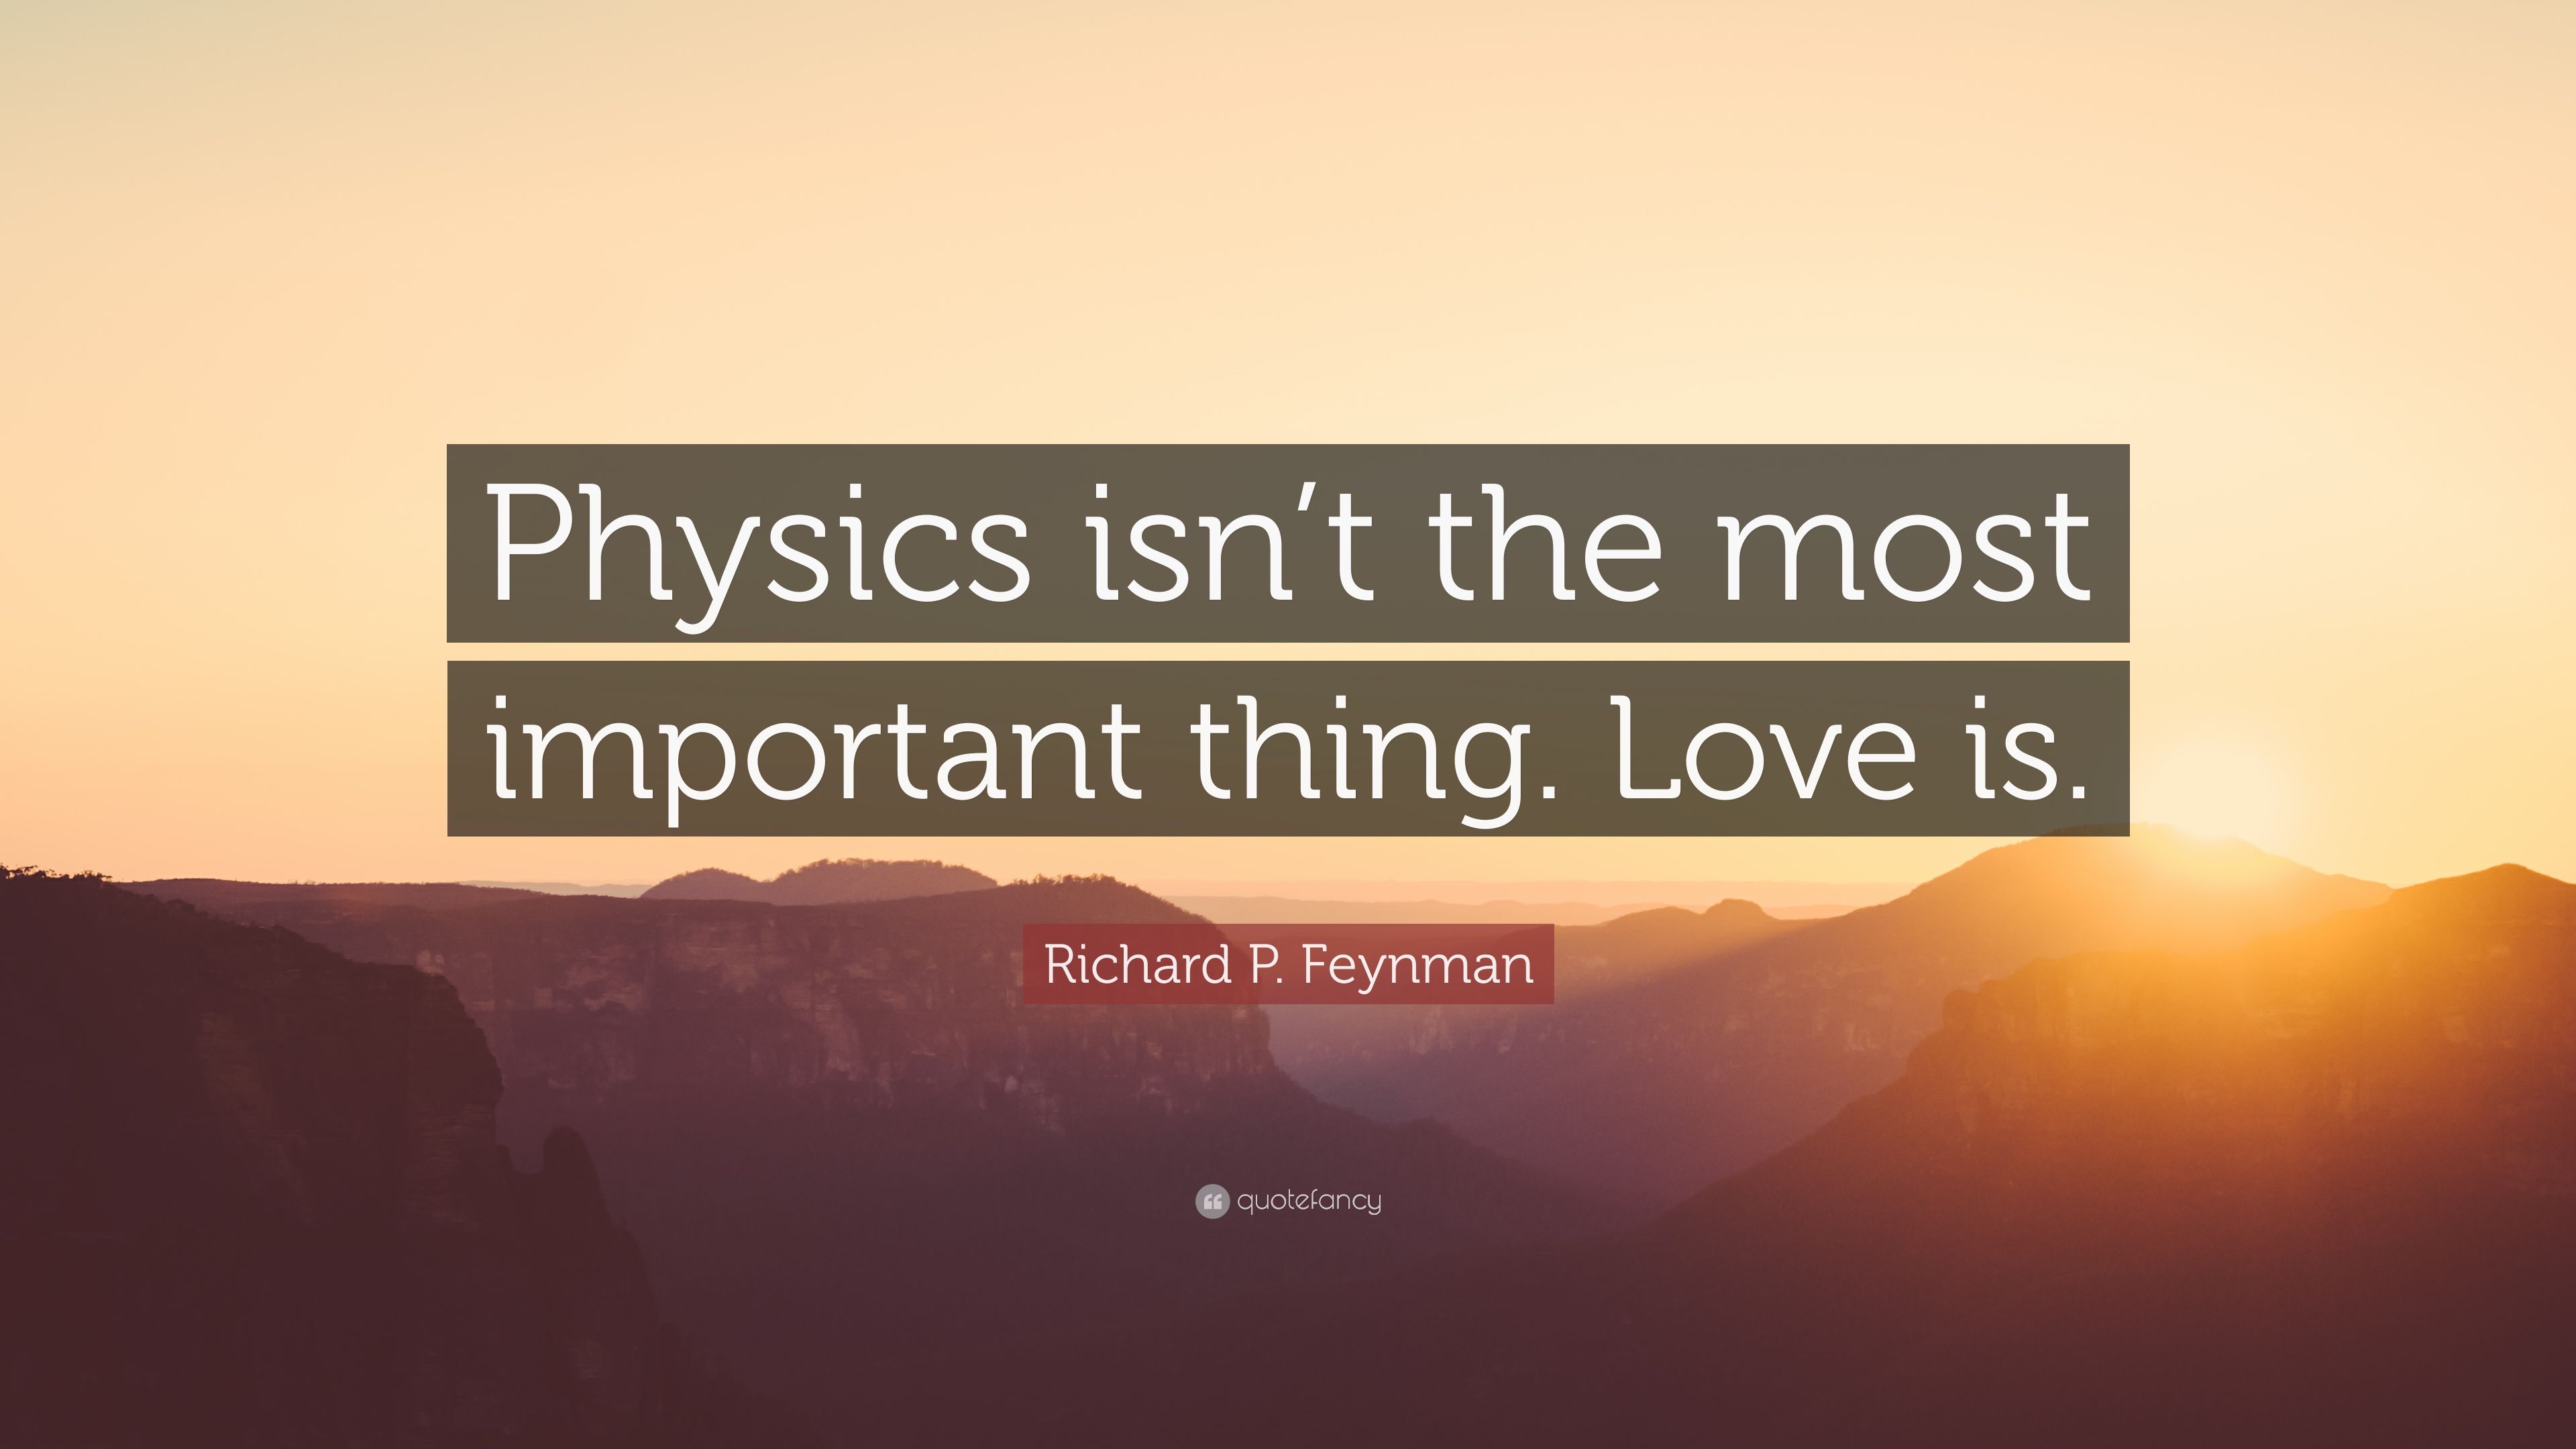 Richard P. Feynman Quote: “Physics isn't the most important thing